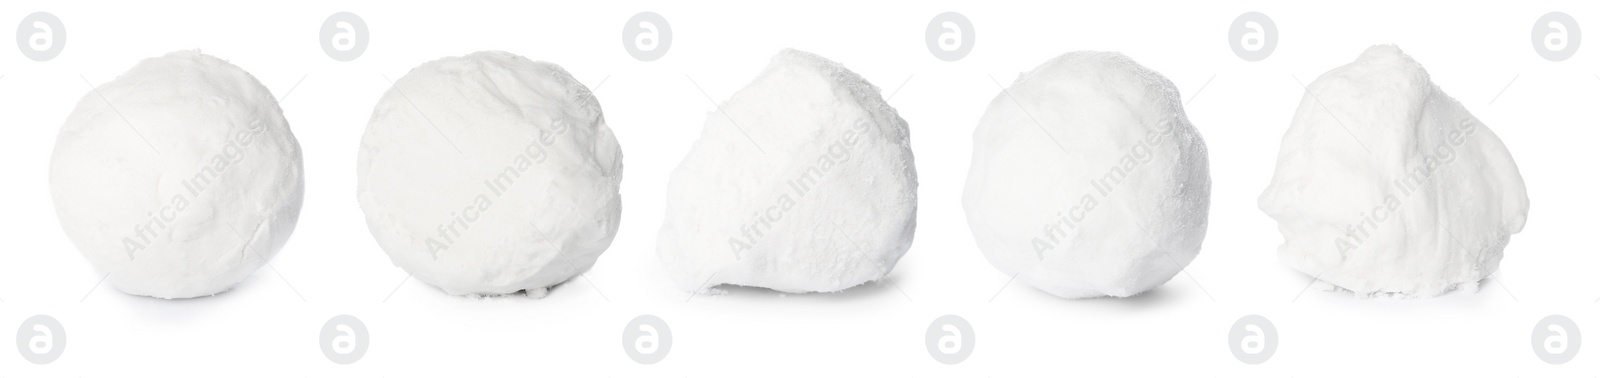 Image of Set of different snowballs on white background. Banner design